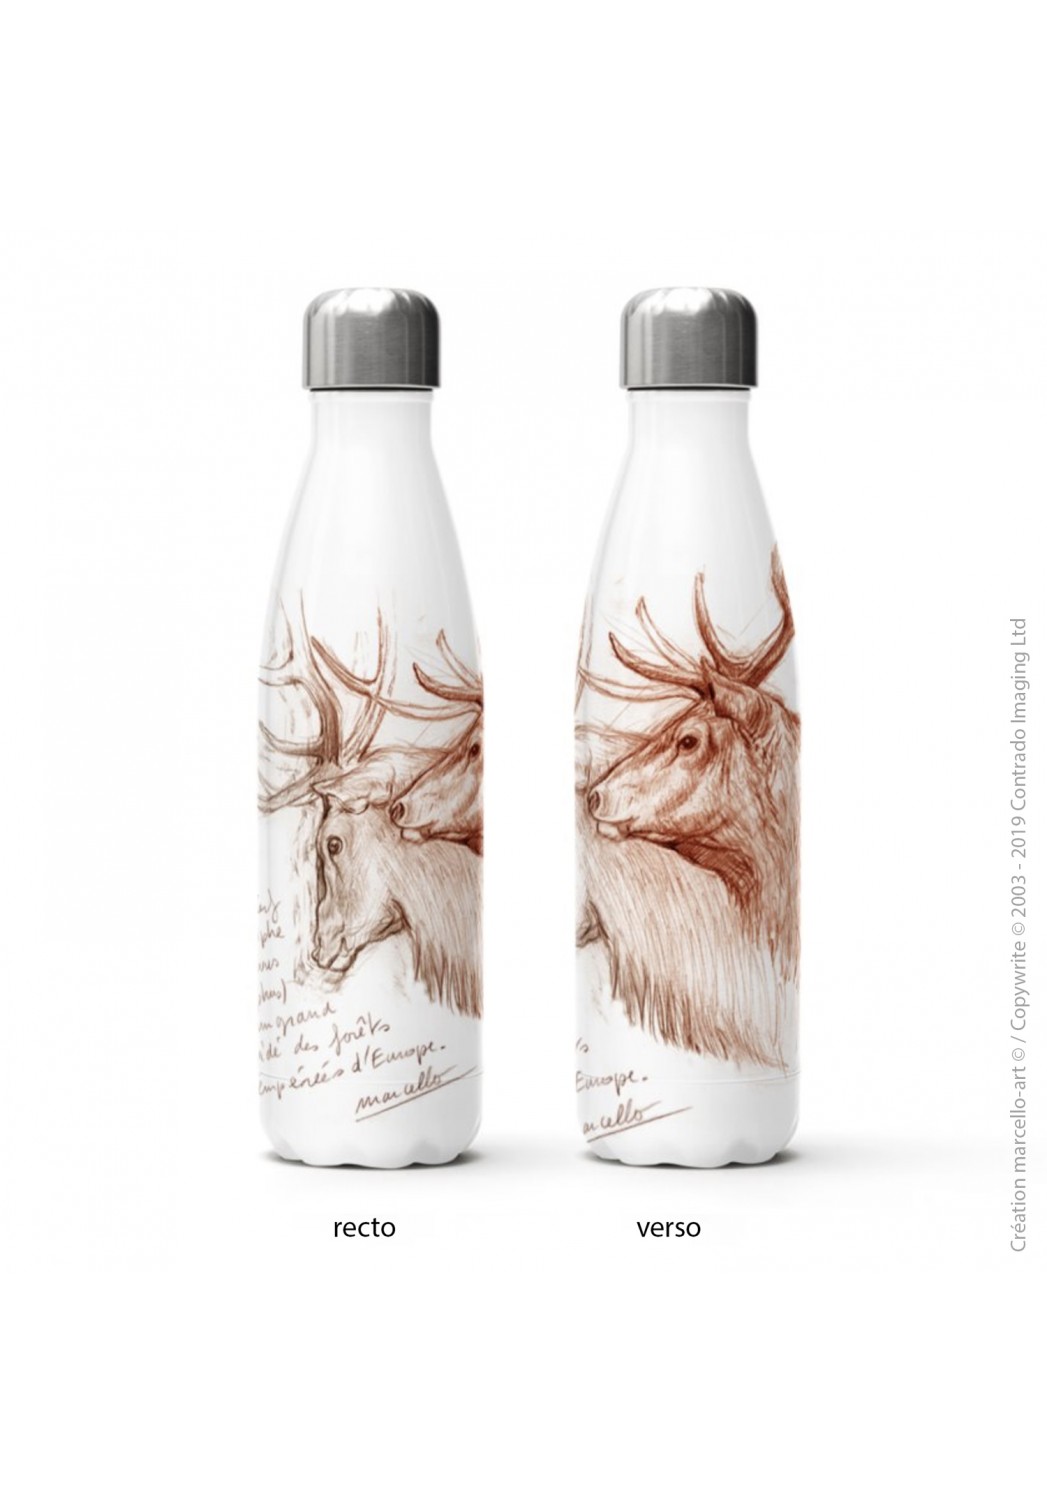 Marcello-art: Decoration accessoiries Isothermal bottle 52 red deer